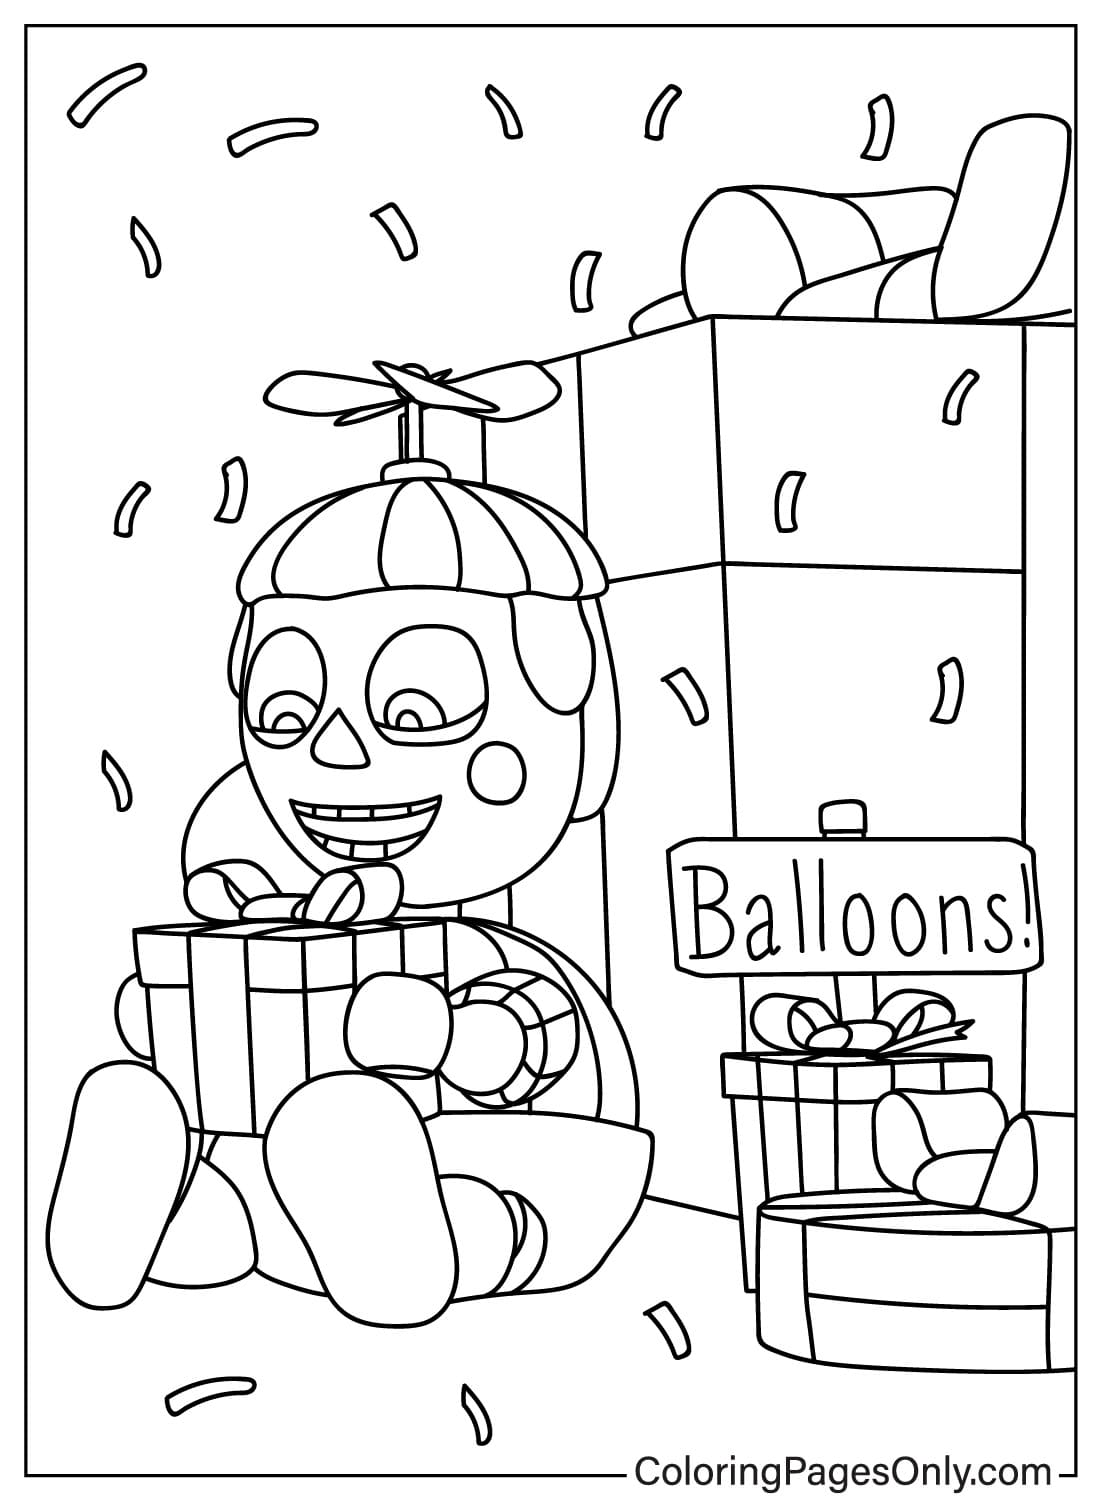 Free Printable Balloon Boy from Five Nights At Freddy's 2